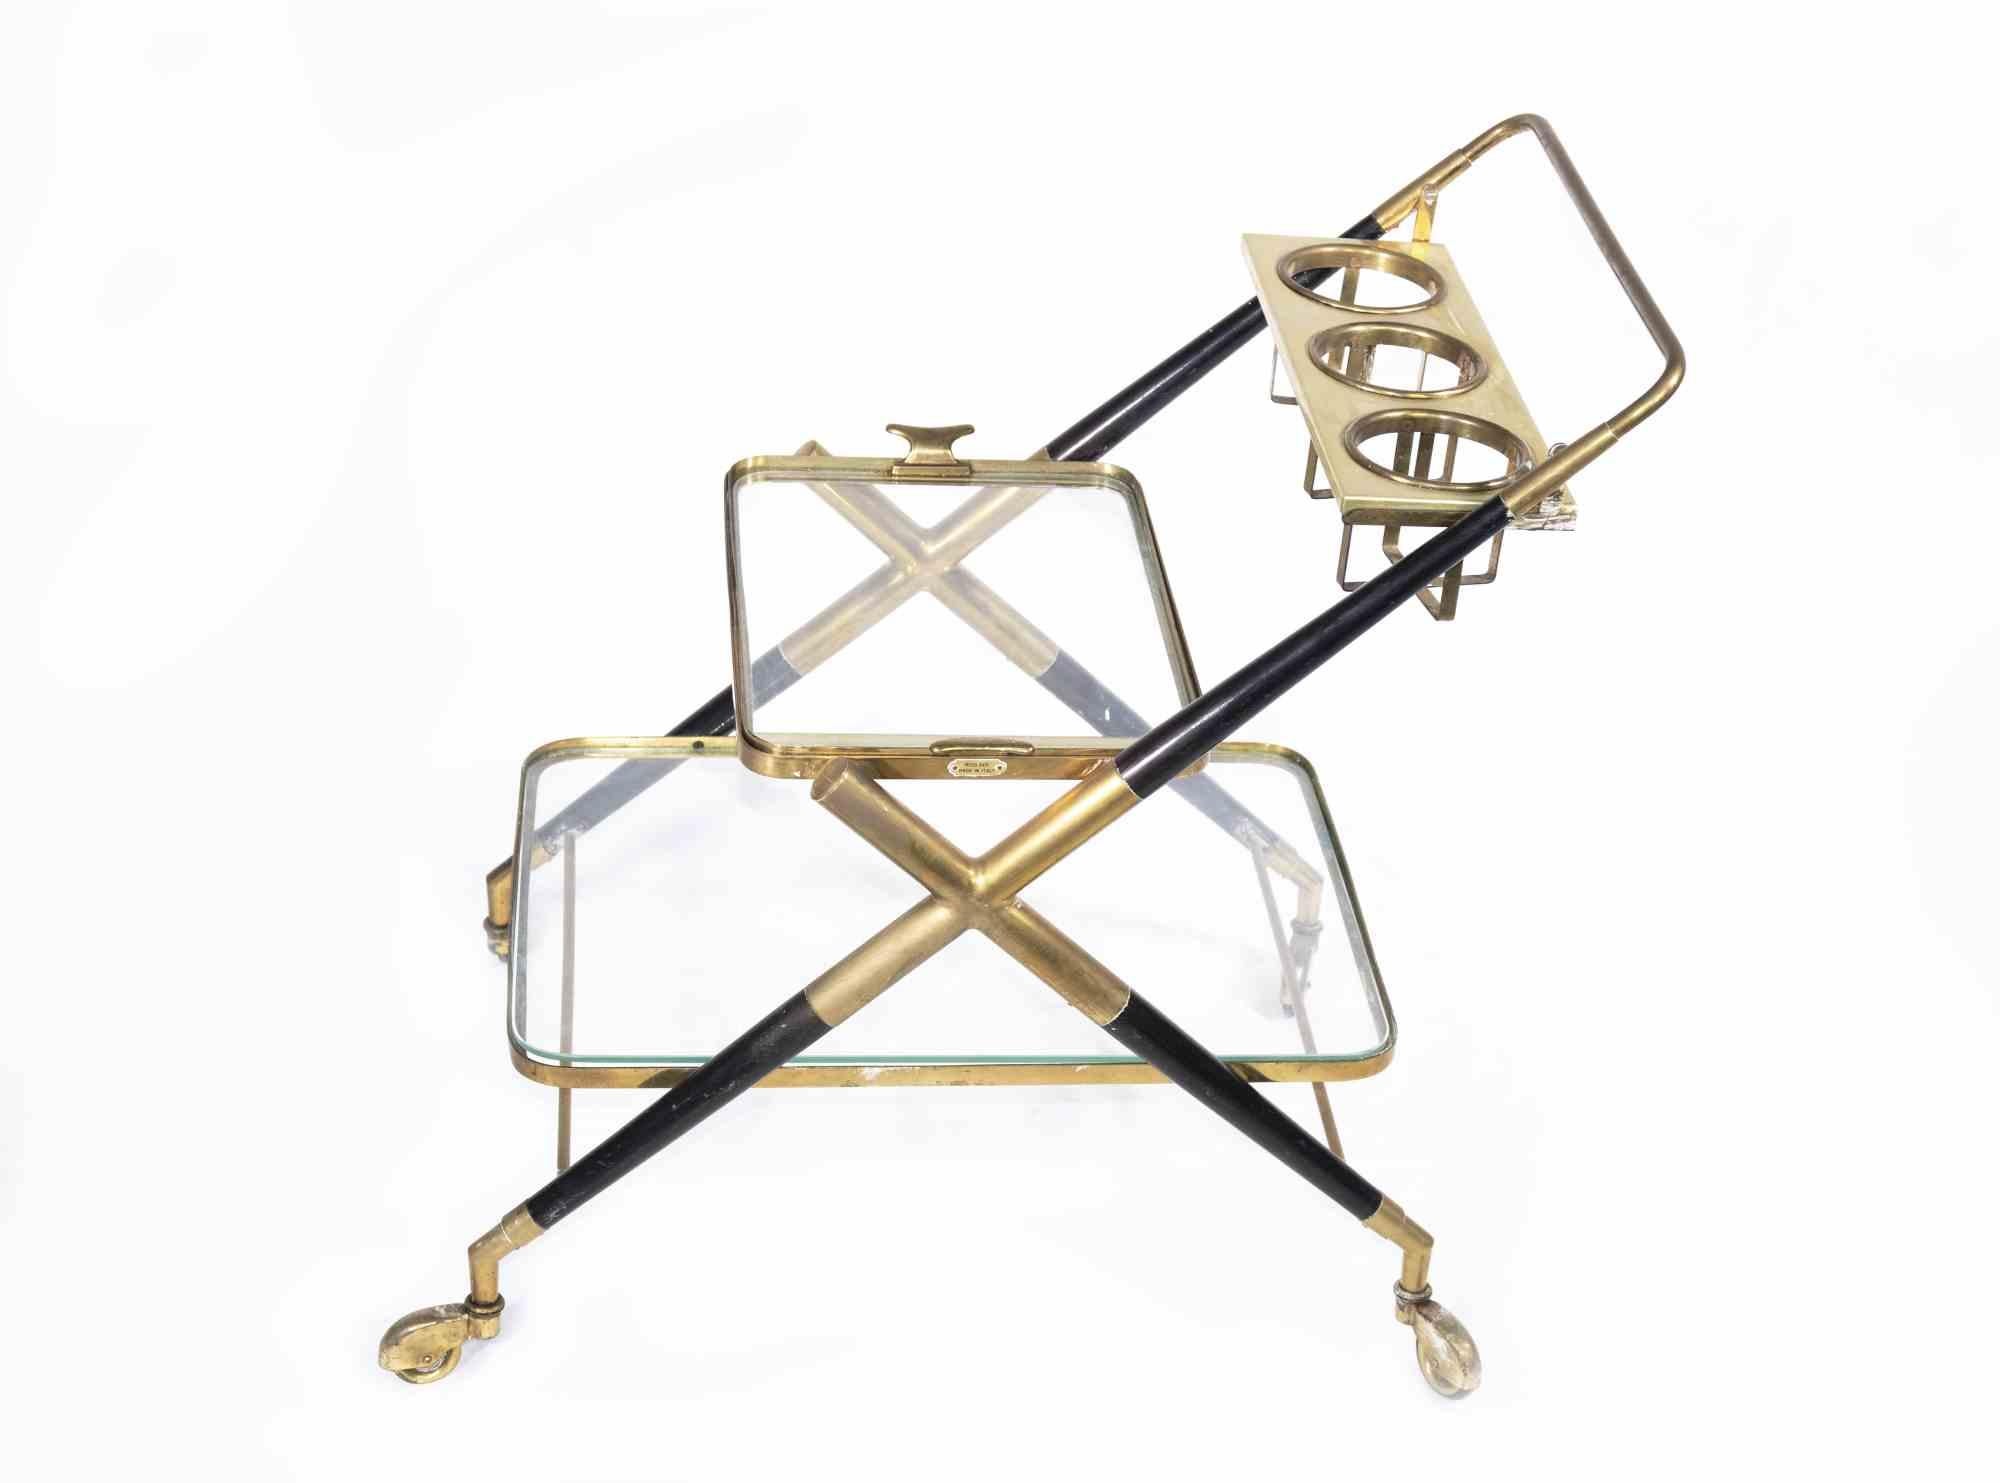 Vintage bar cart is an original design item attributed to the Italian designer Cesare Lacca in the 1970s.

A black and brass bar cart with shelves glass. 

Mint condition.

Serve your drinks and food on this vintage cart!